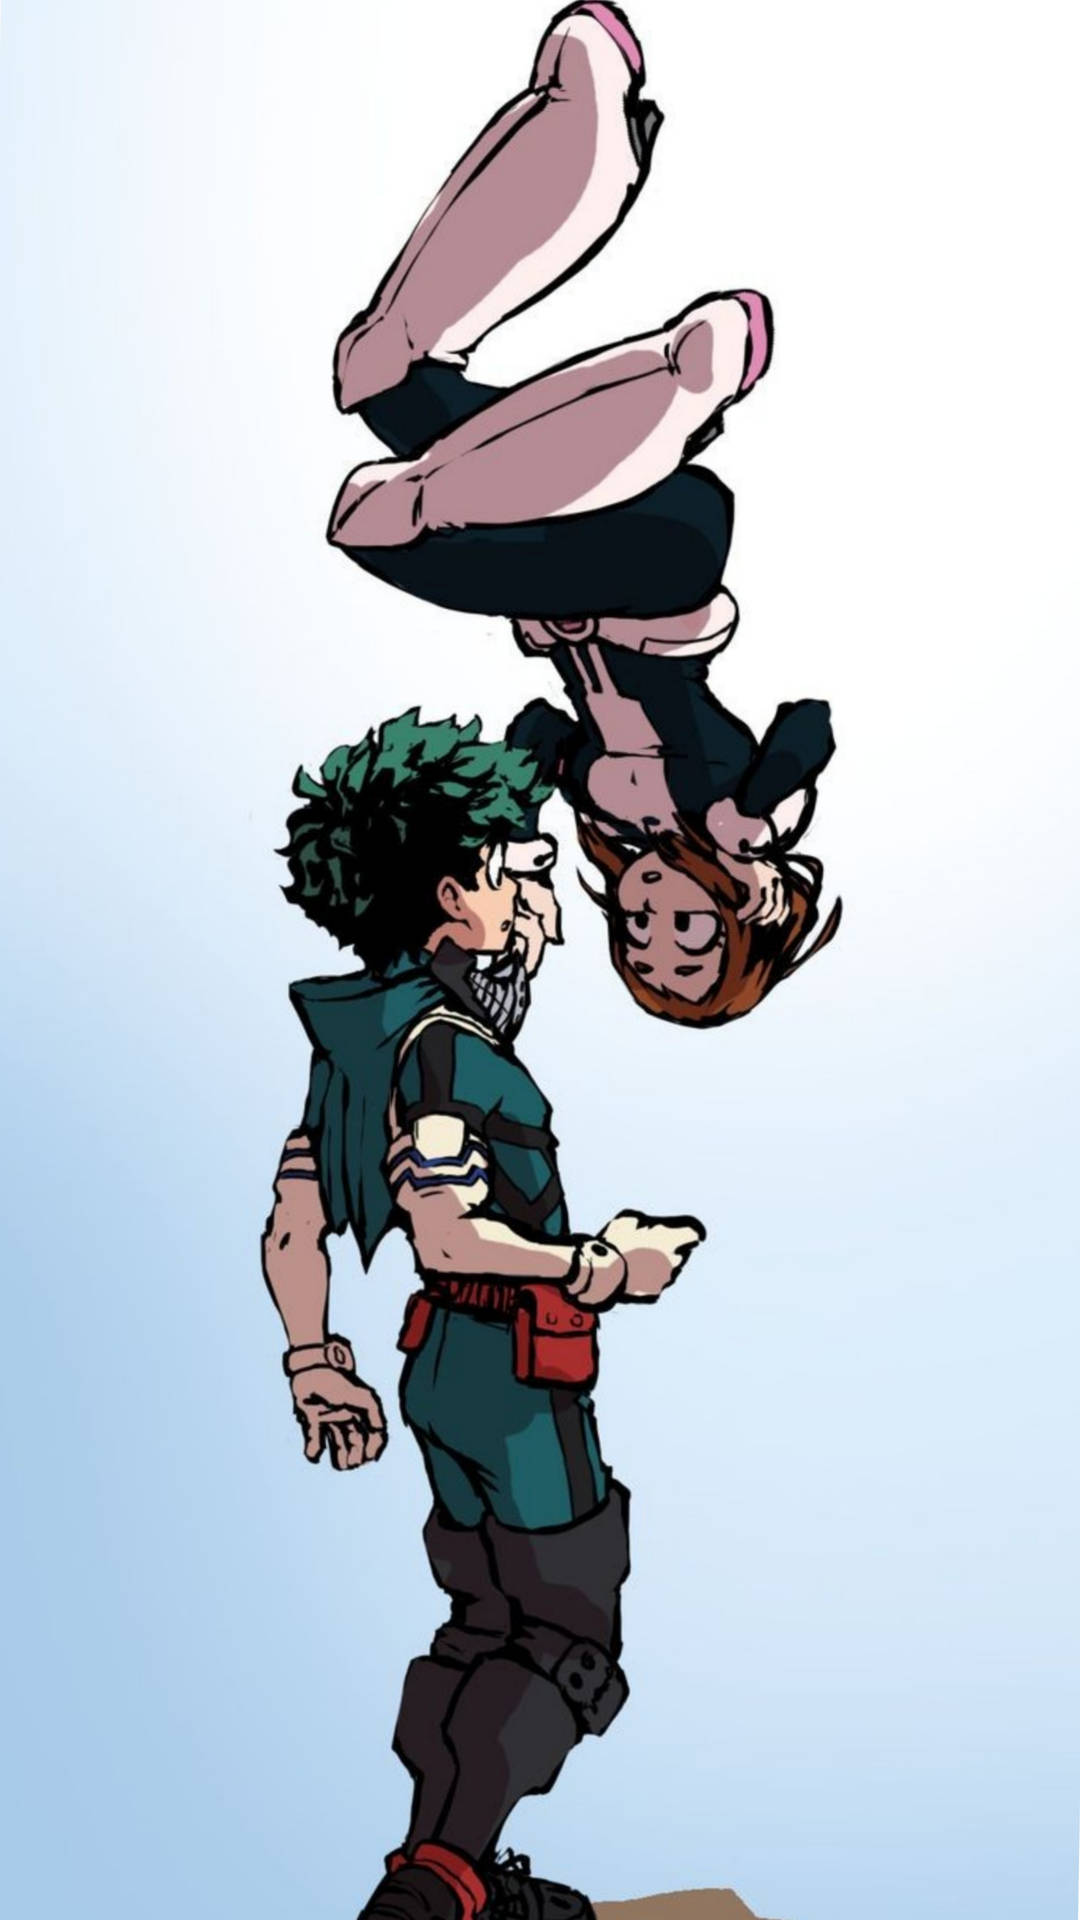 Chapter 317 Deku iPhone Wallpaper I hate when you cant see the date and  time so I added the black box I didnt create or design this image Just  sharing  rBokuNoHeroAcademia